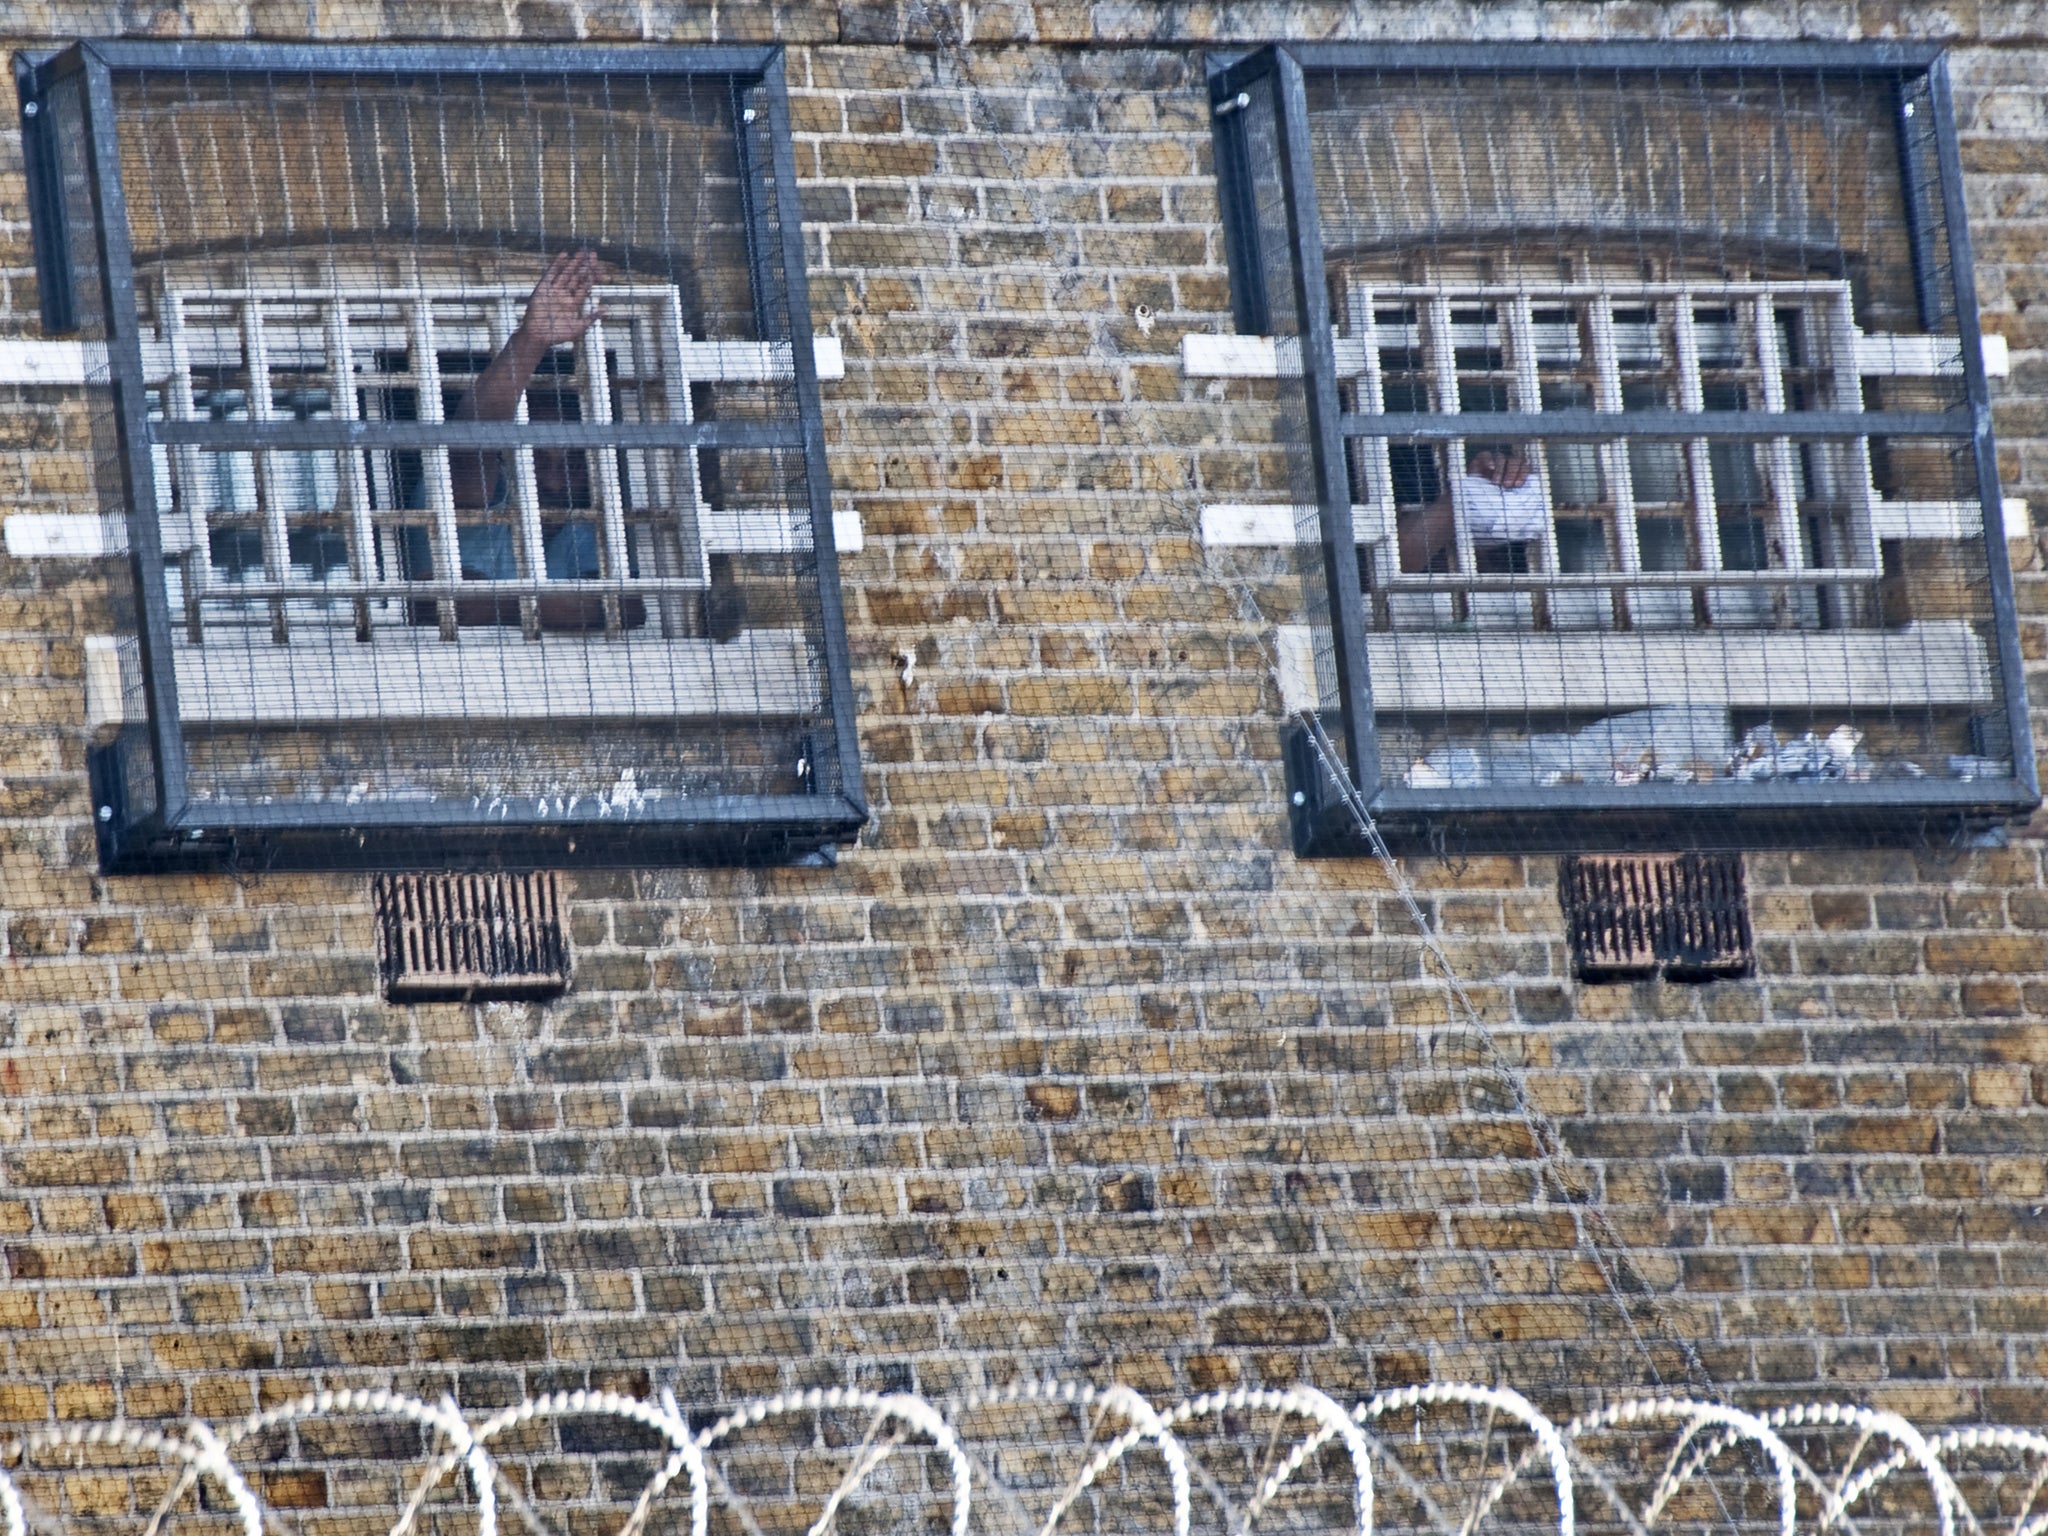 Prisoners waving out their cell window in Brixton prison in South London